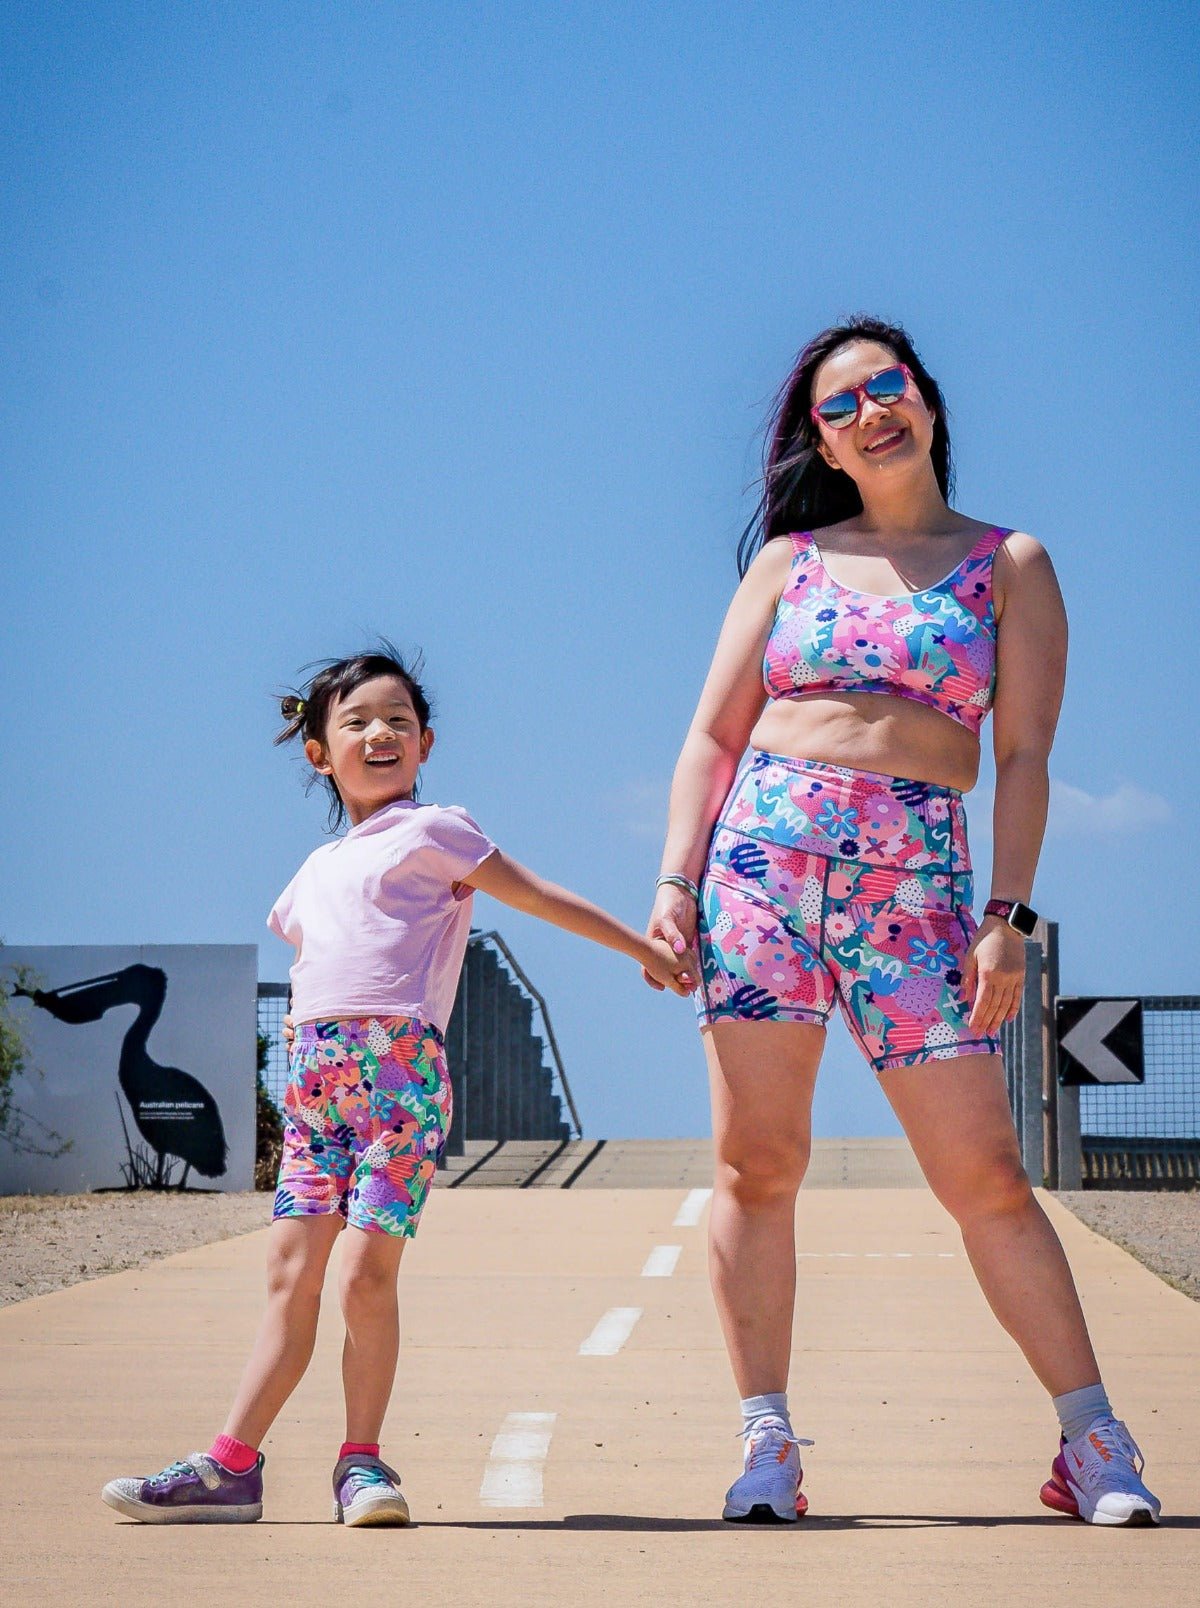 Razzle Dazzle - Kids Biker Shorts - matching mother daughter outfits